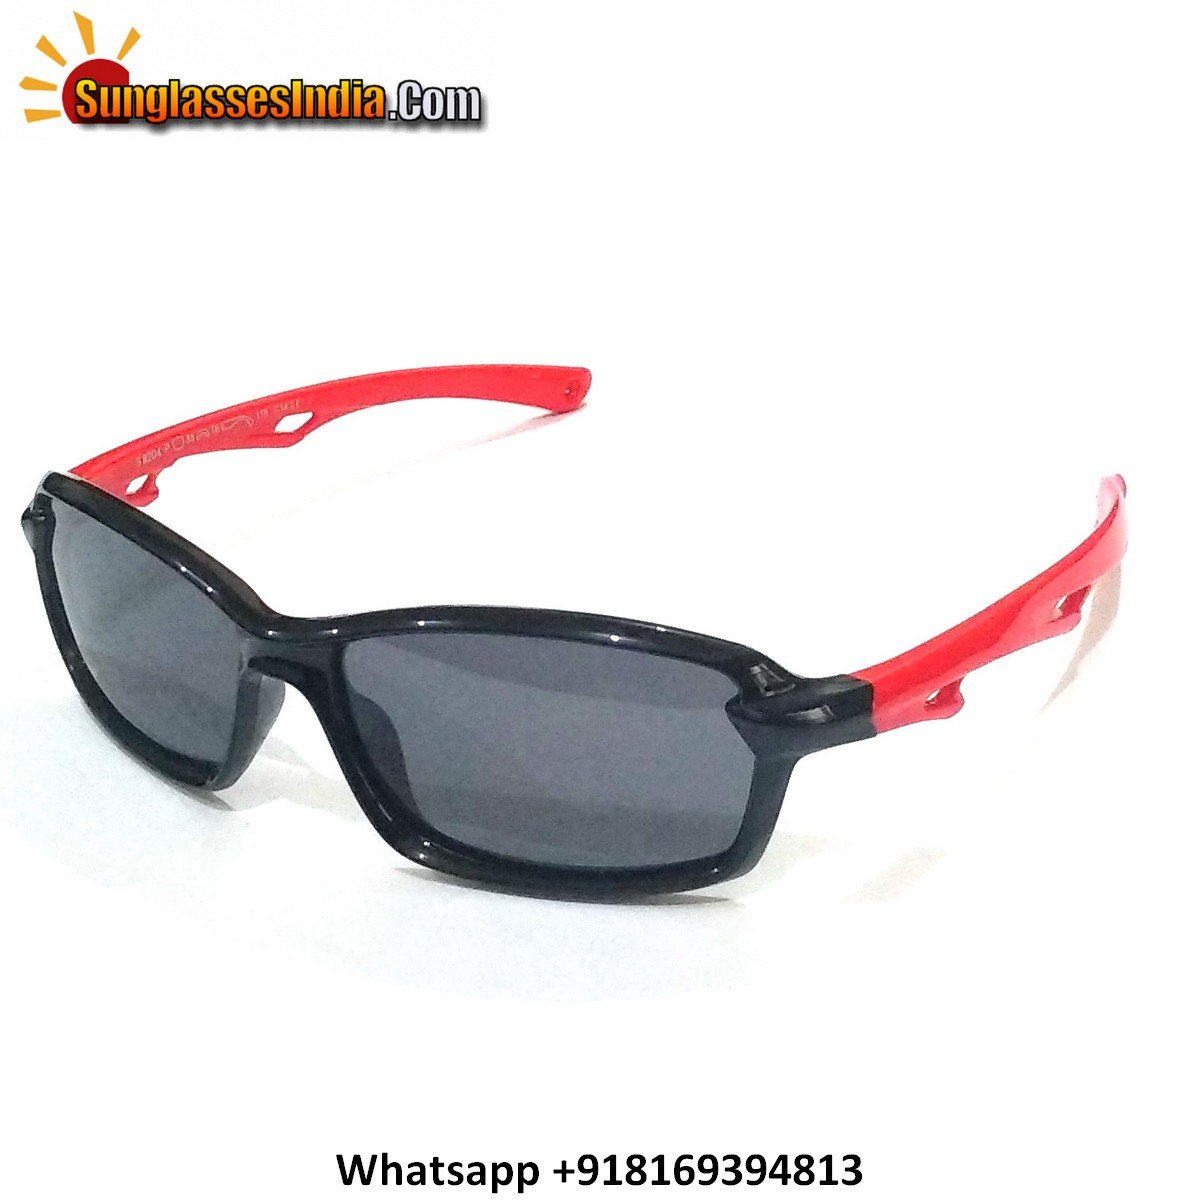 Unbreakable Kids Polarized Sunglasses Light Weight TR Material S8204BlackRed